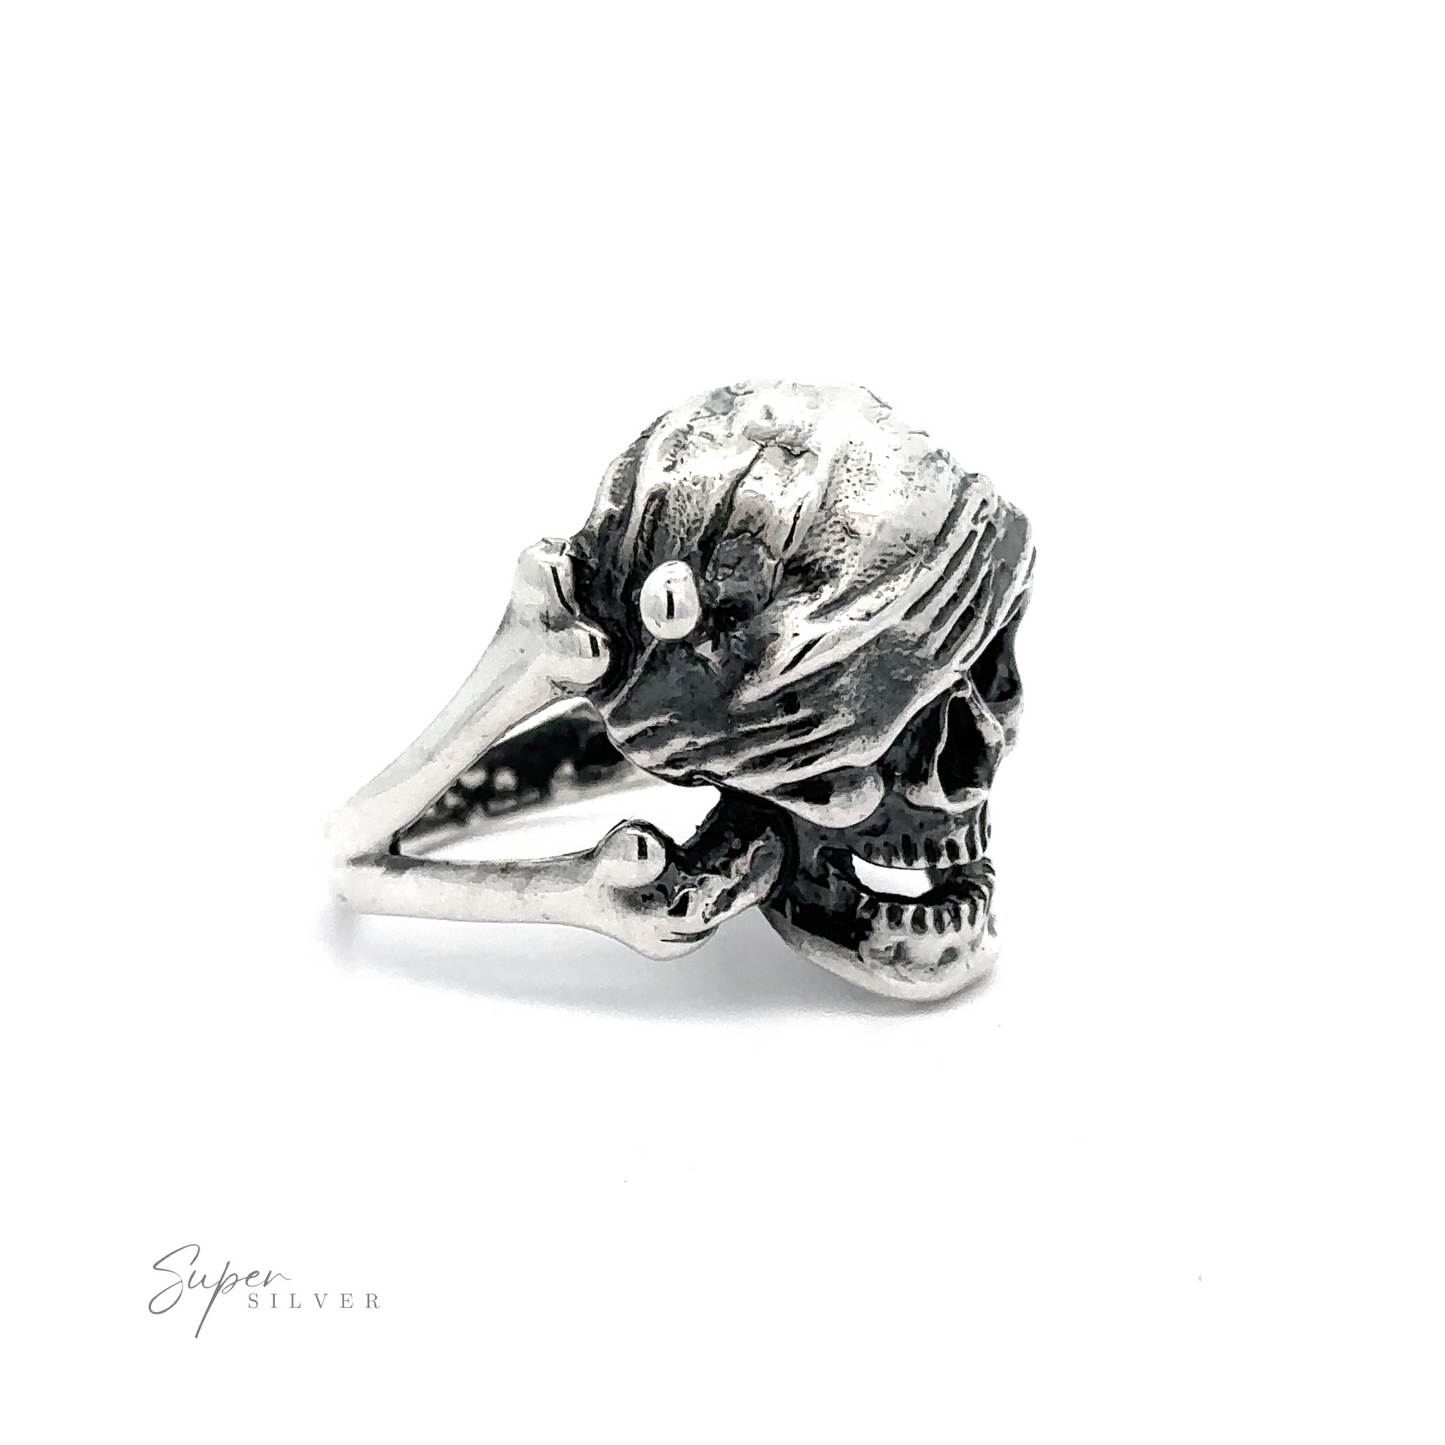 Large Pirate Skull And Crossbones Ring shaped like a pirate skull with detailed textures and eye sockets, displayed against a white background with branded signature "super silver.